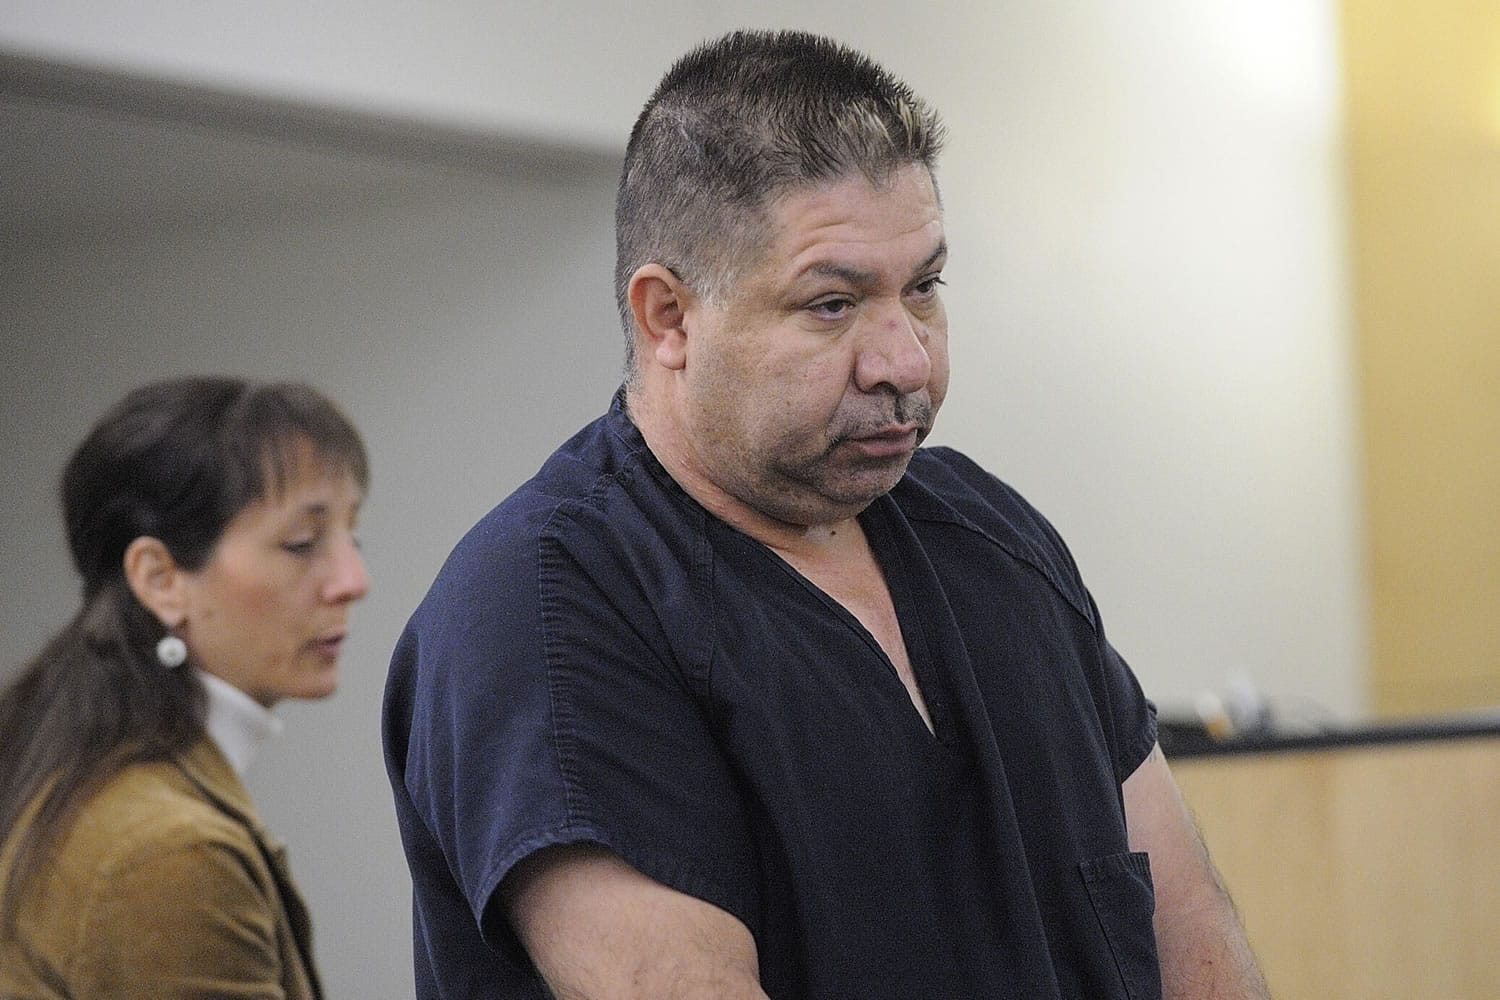 El Rancho Viejo restaurant manager Ramon Lopez Guitron, seen here at his first court appearance last year, will plead guilty to drug charges.